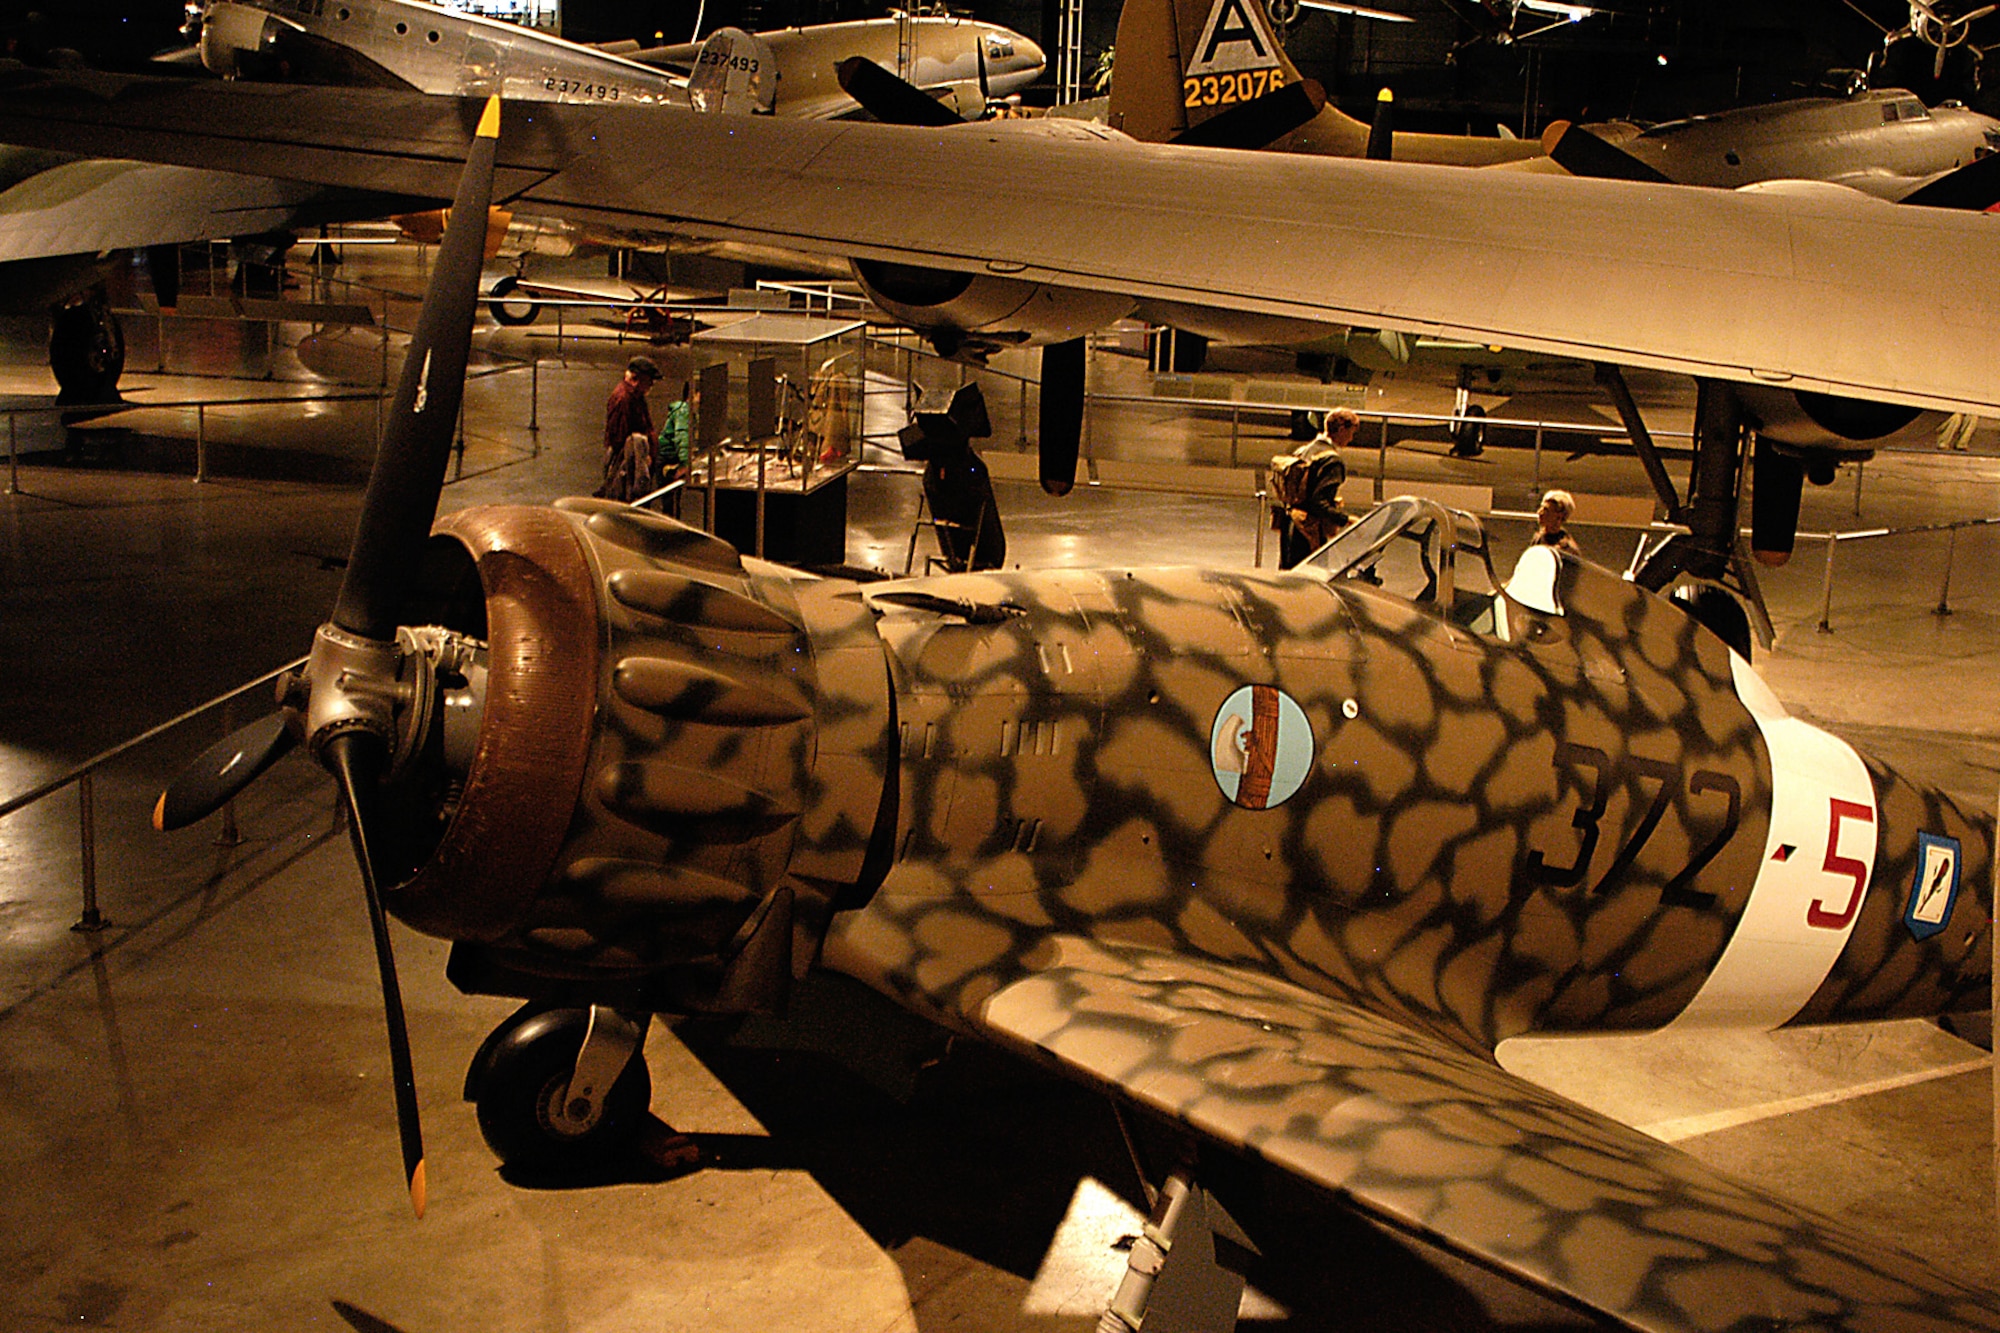 Macchi MC.200 Saetta in the World War II Gallery at the National Museum of the United States Air Force. (U.S. Air Force photo)
